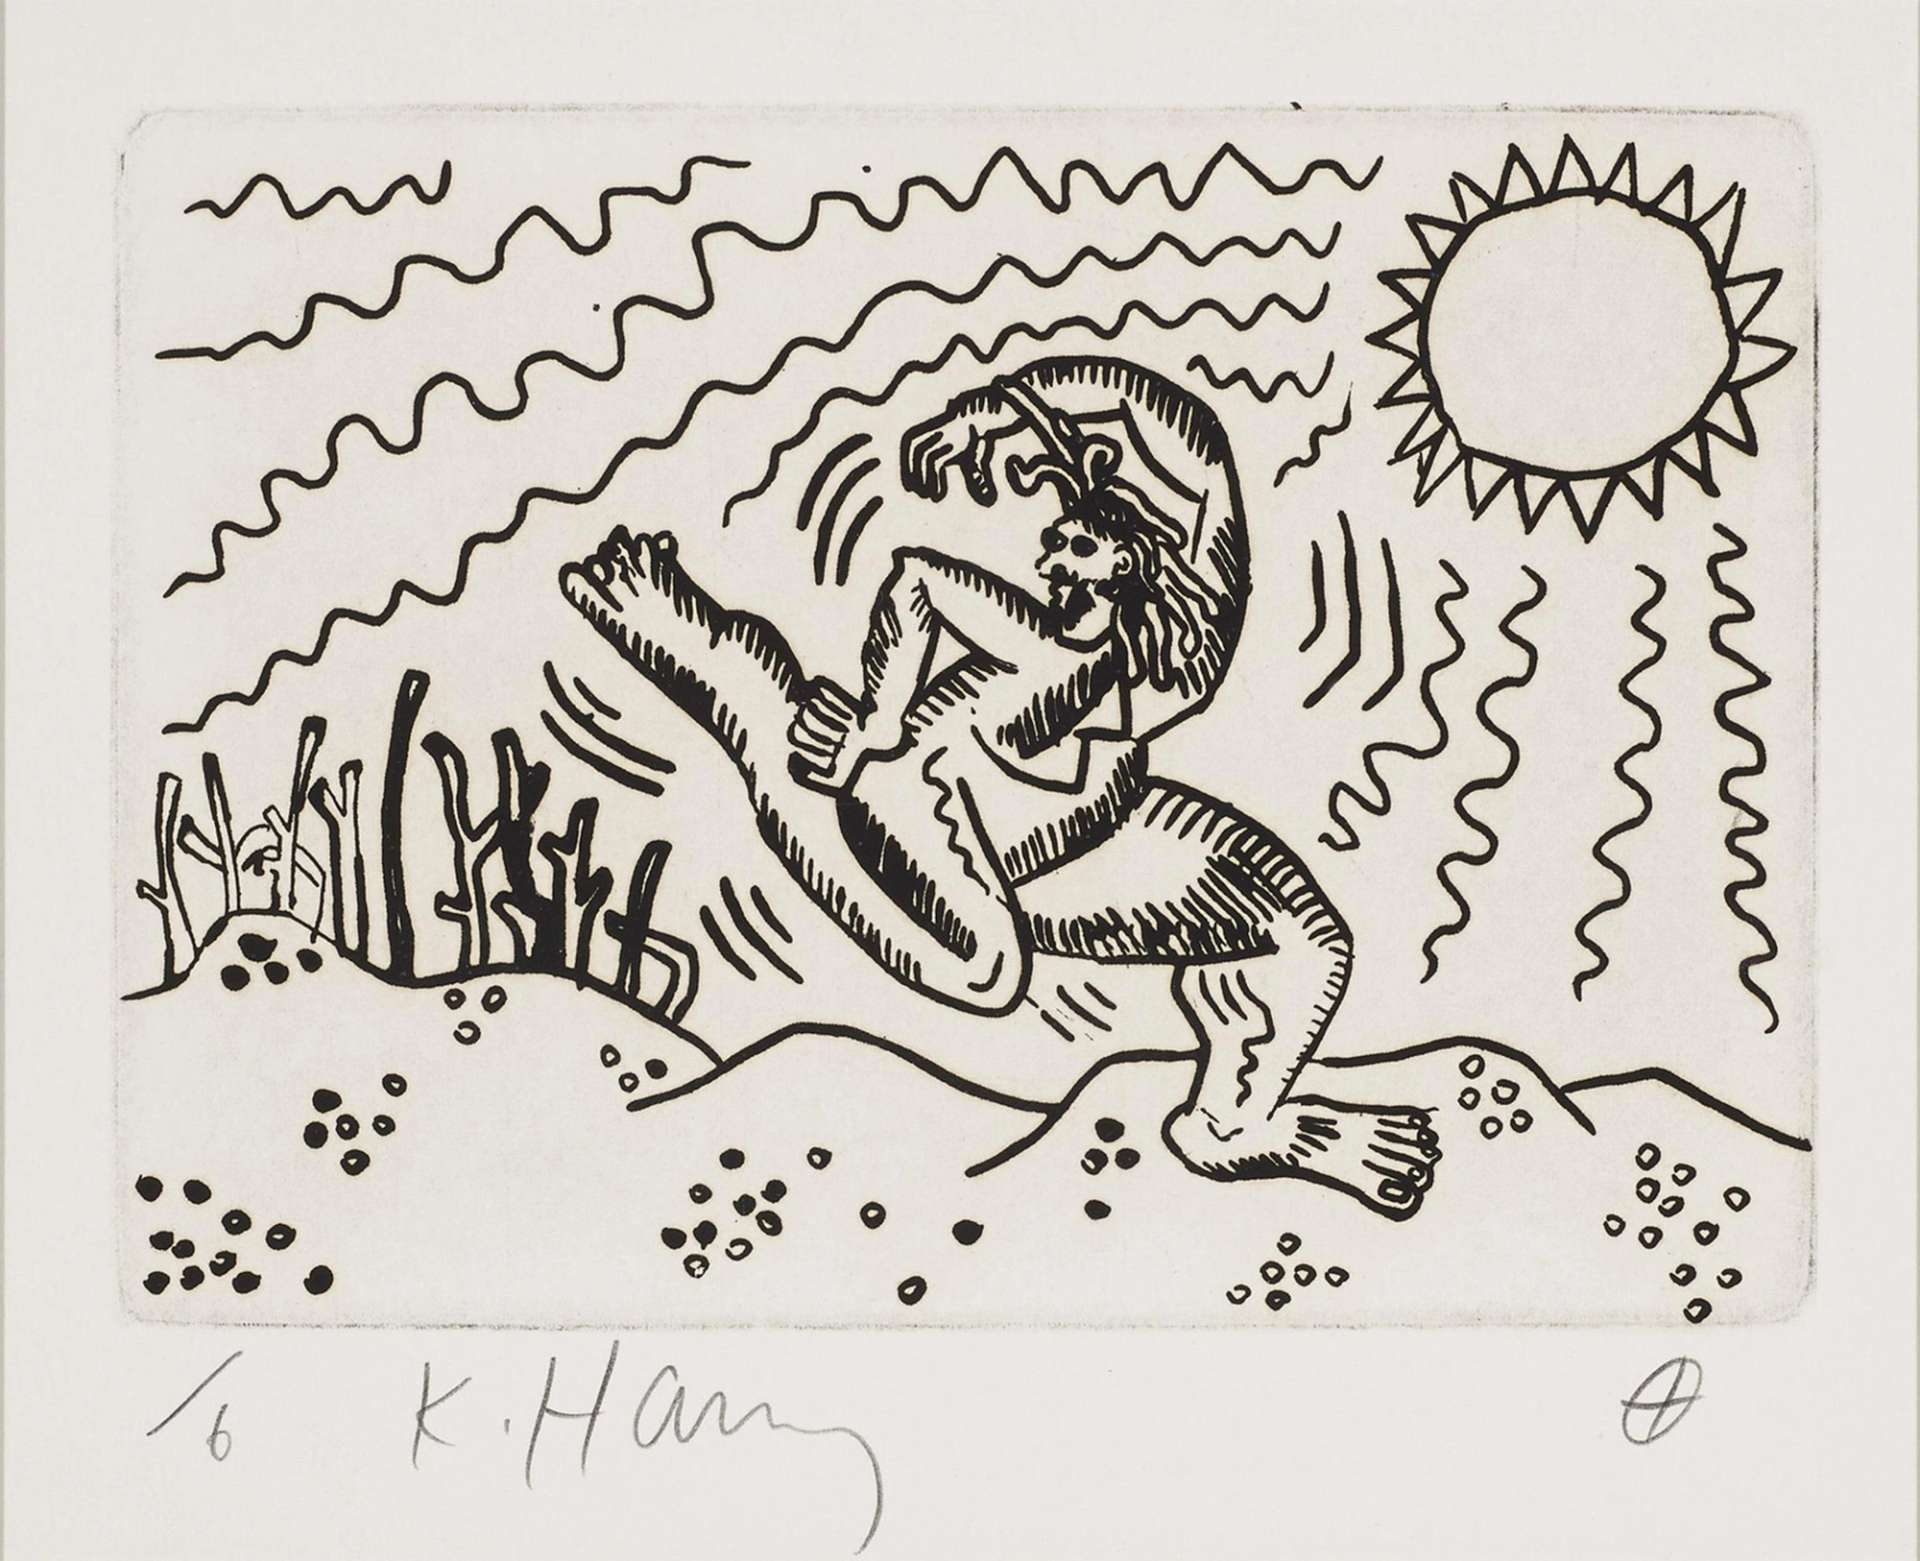 Keith Haring: Untitled 1989 - Signed Print